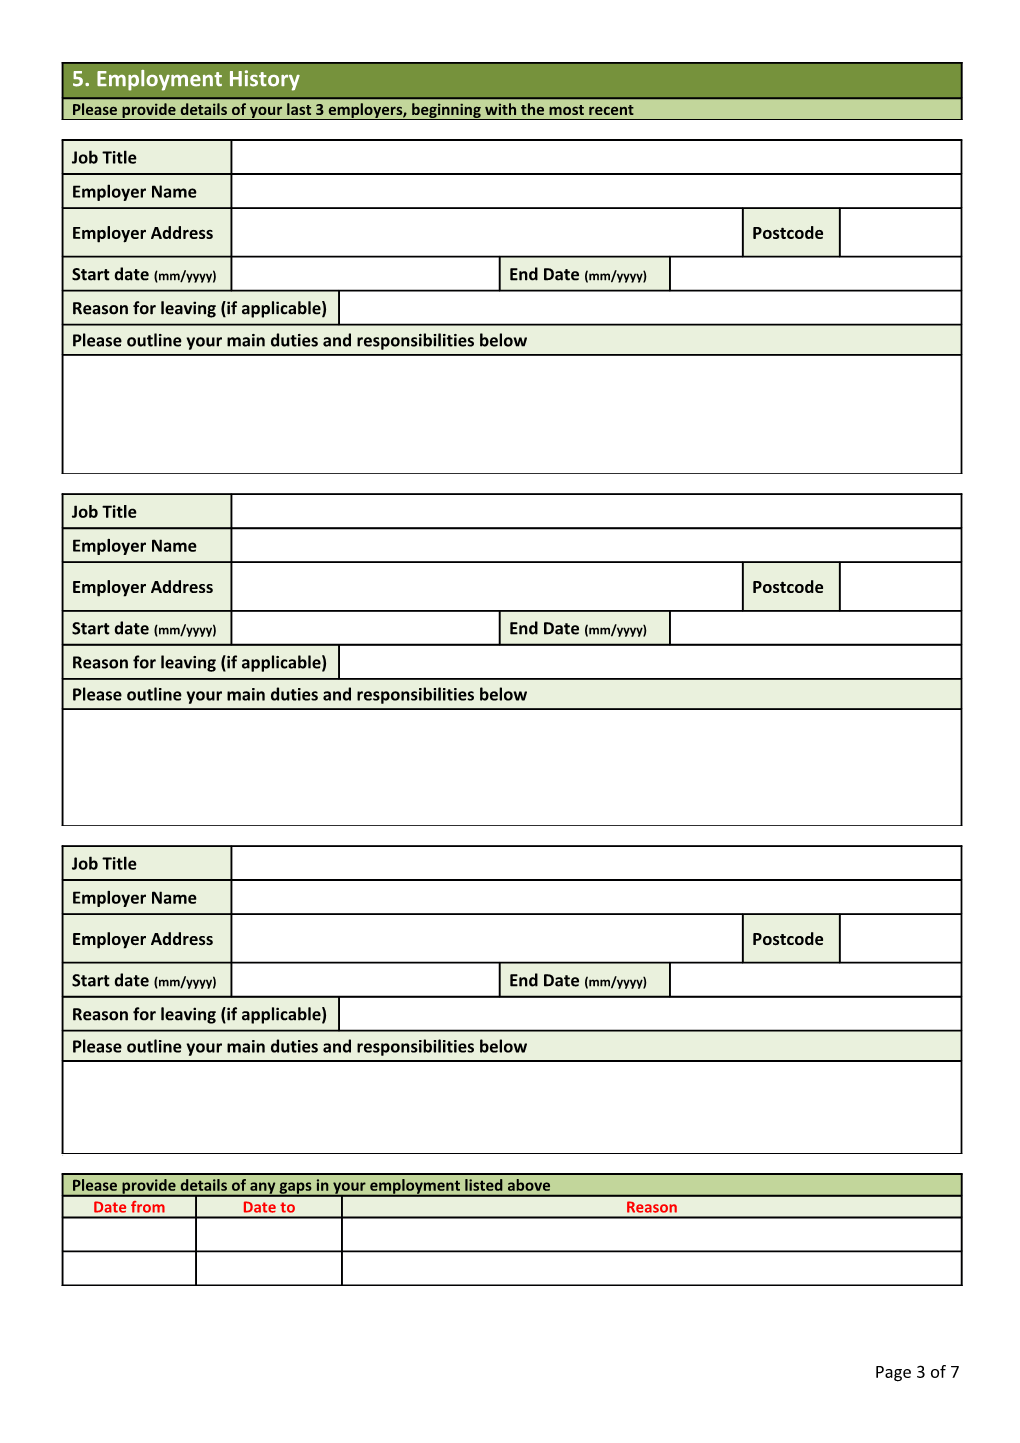 Office Administrator- Application Form